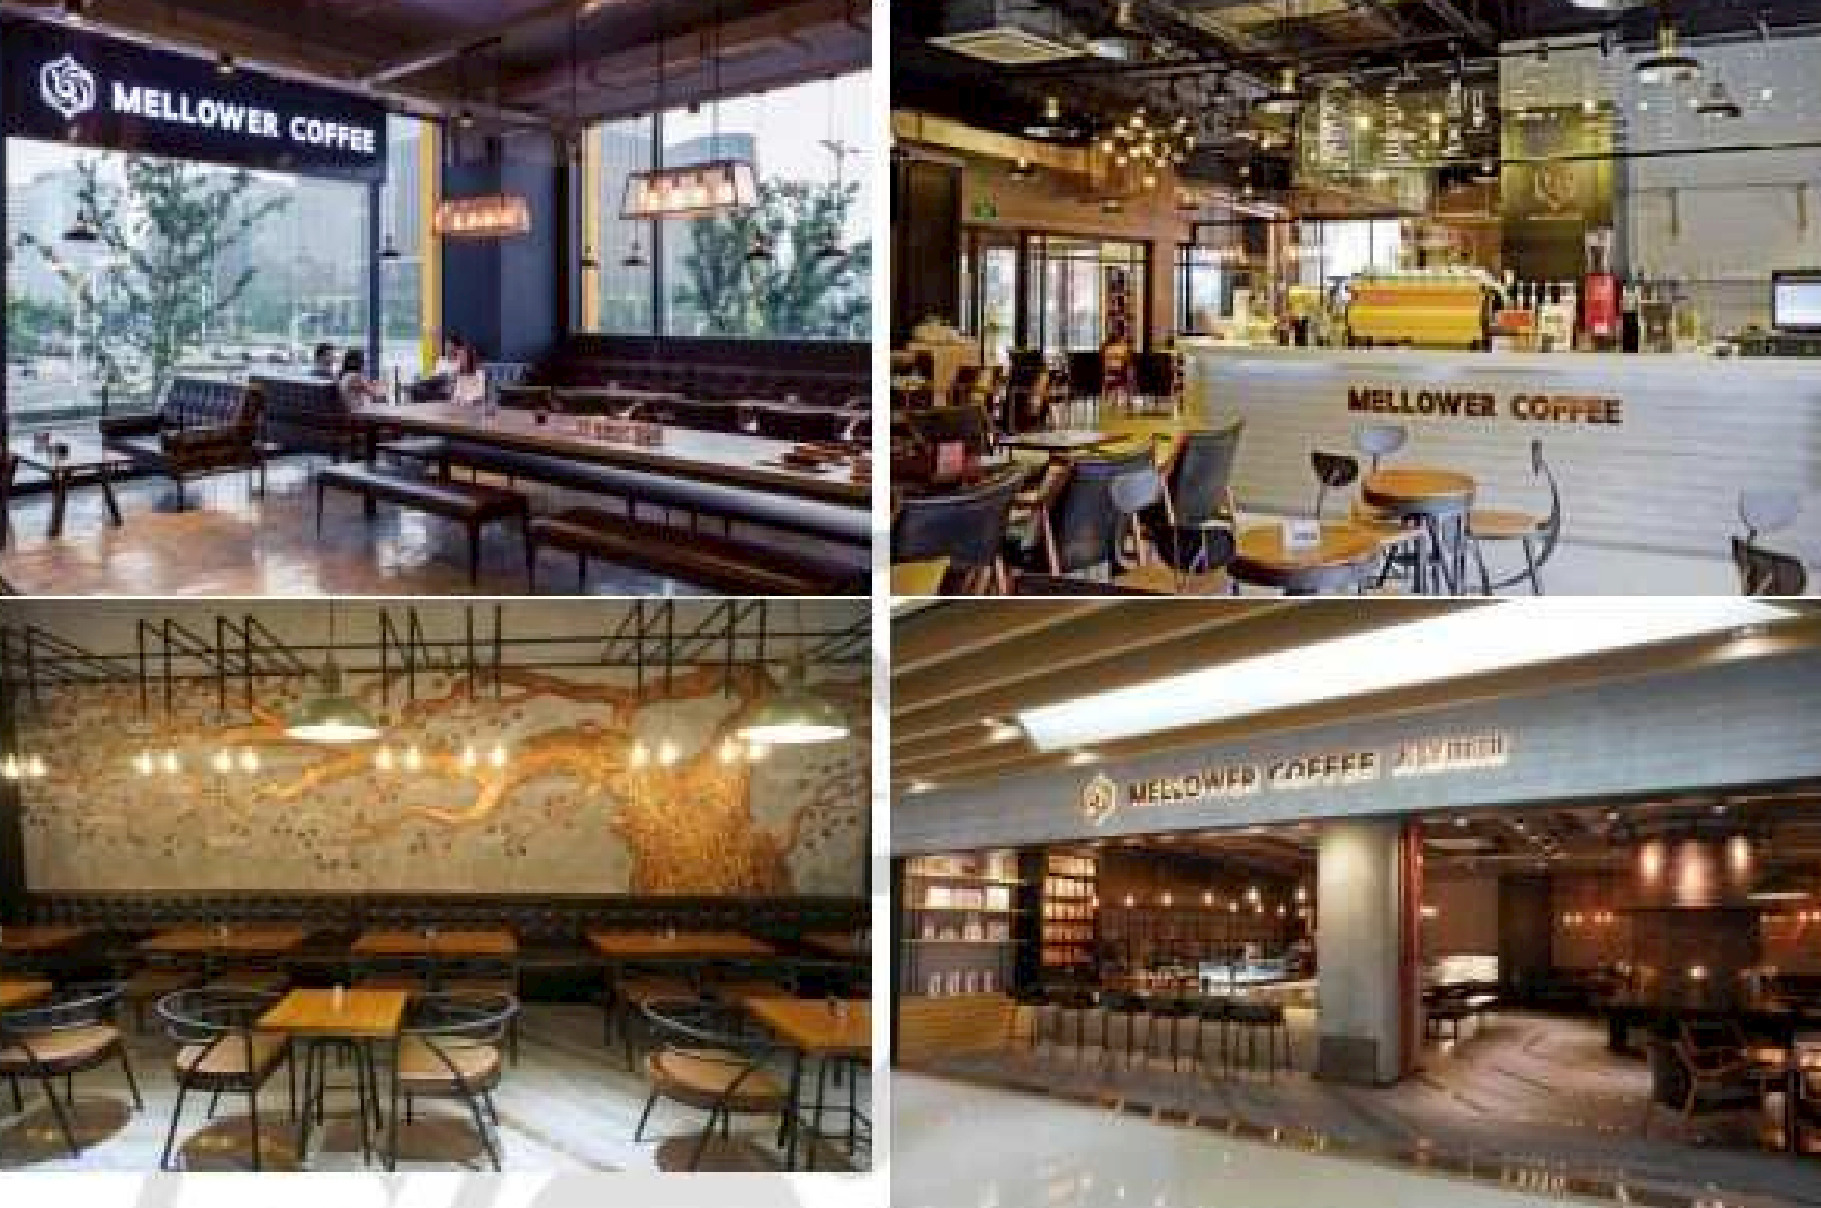 A photo shows four panels depicting the interior and exterior view of Mellower Coffee shop. The arrangements depict long tables with benches along with tables and chairs with bulbs, and a wall arrangement depicting the branches of a tree.